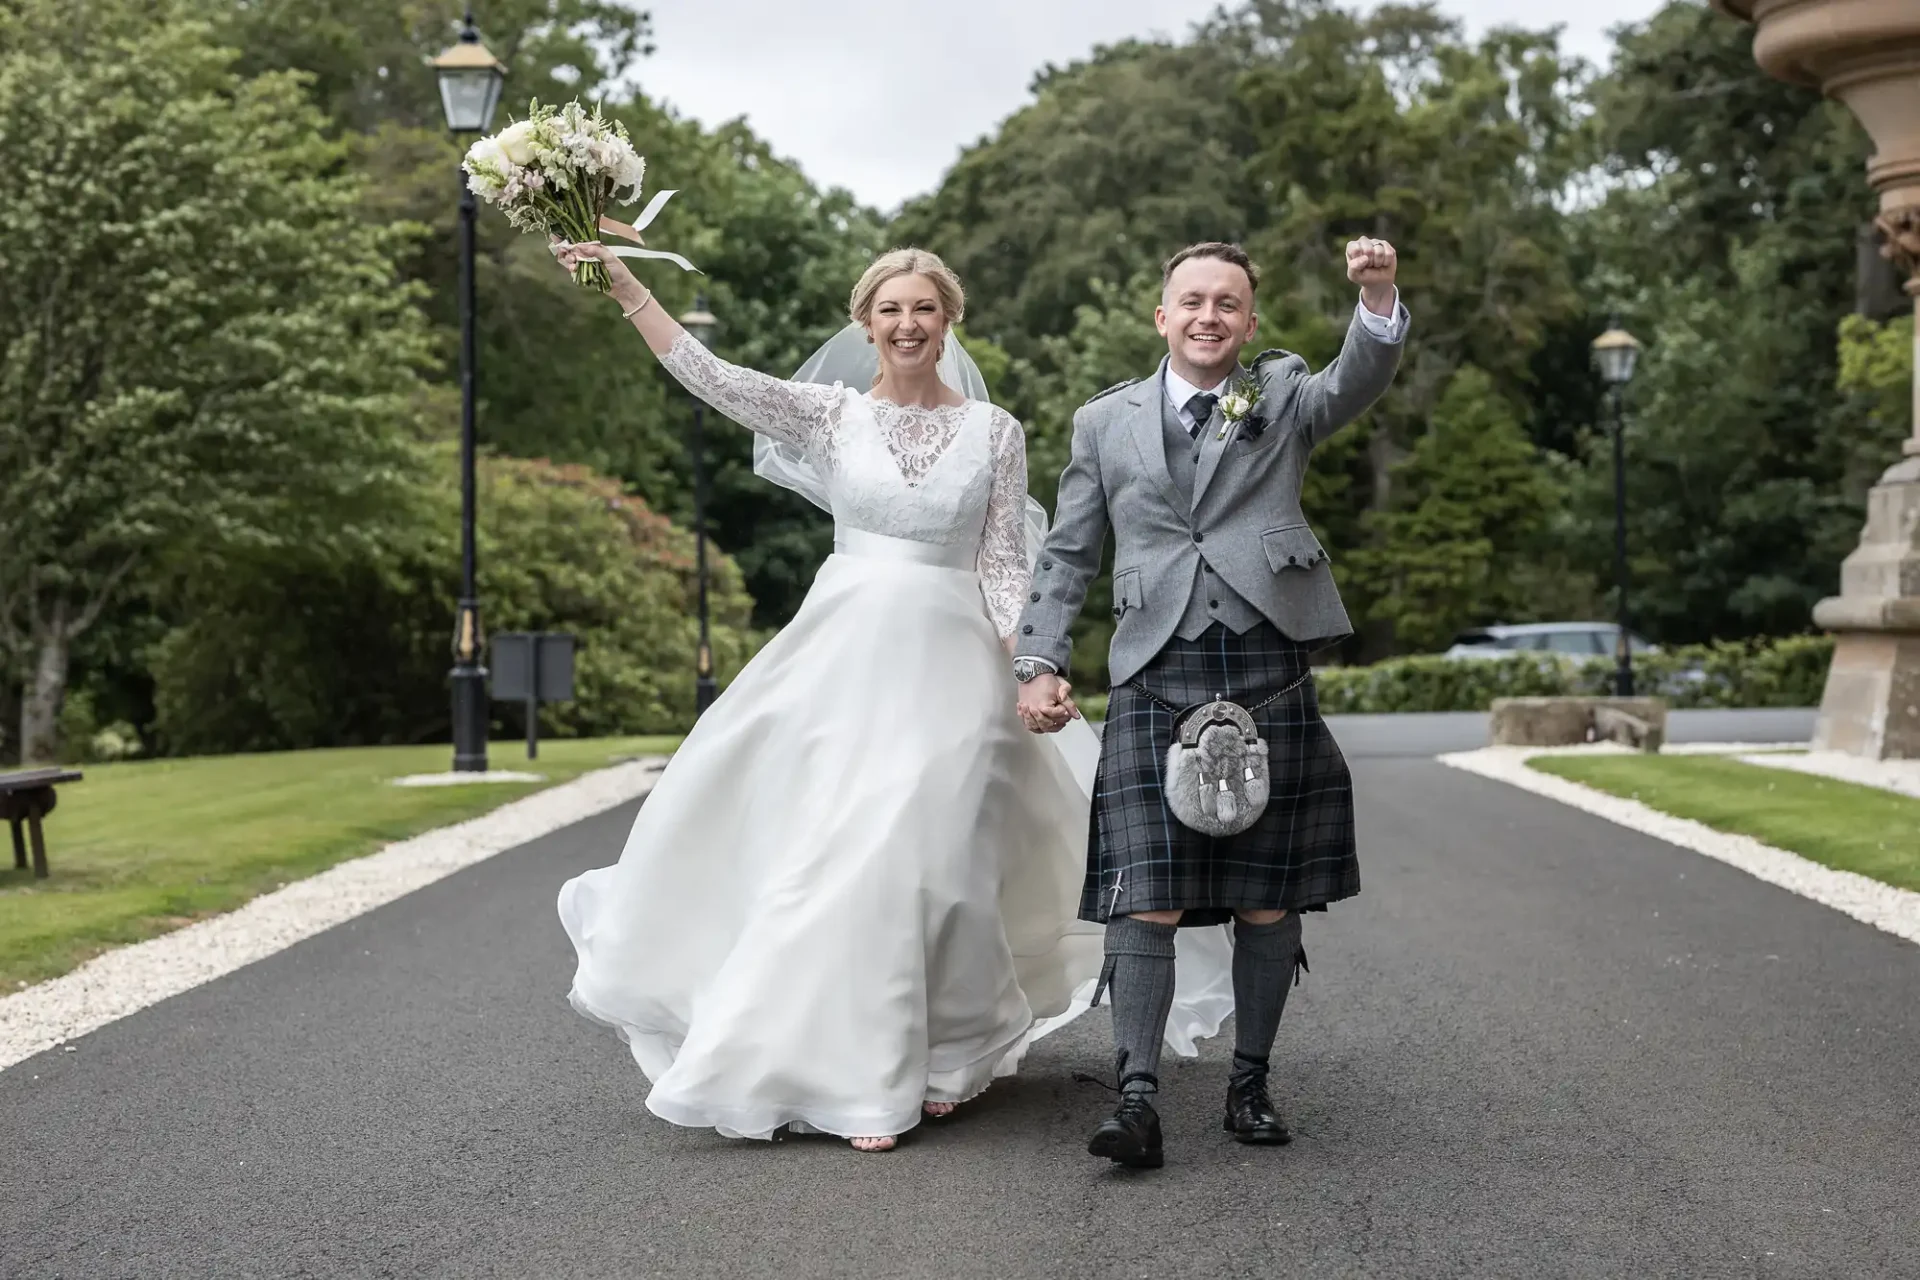 Cornhill Castle wedding photos: A bride and groom walk hand-in-hand outdoors. The bride wears a white dress and holds a bouquet in the air. The groom wears a kilt and gray jacket, raising his fist in celebration. They are smiling.